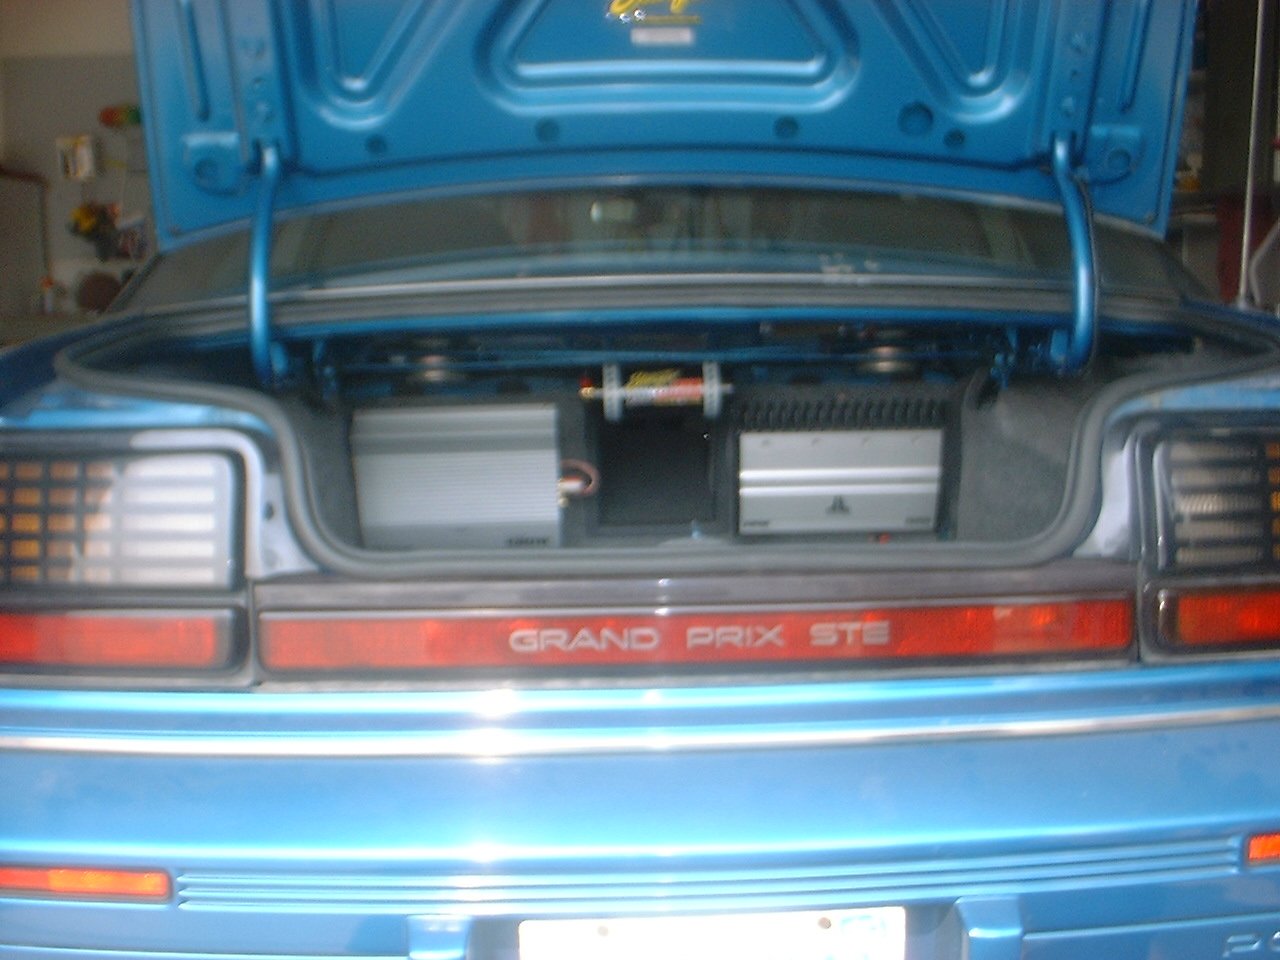 trunk wihtout subs in them